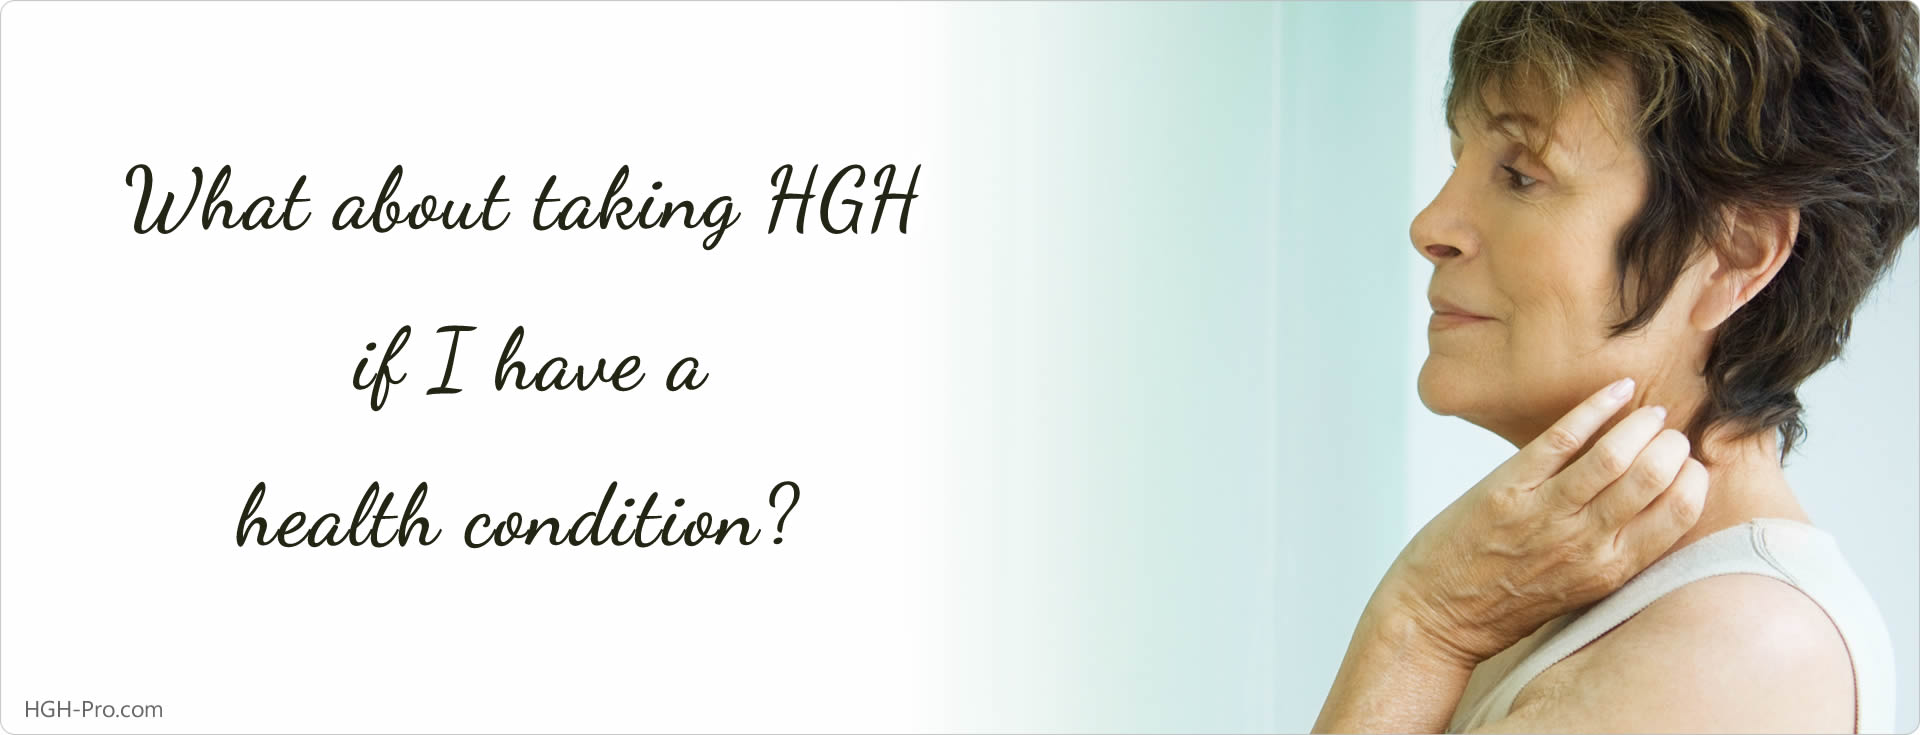 Taking HGH with health conditions